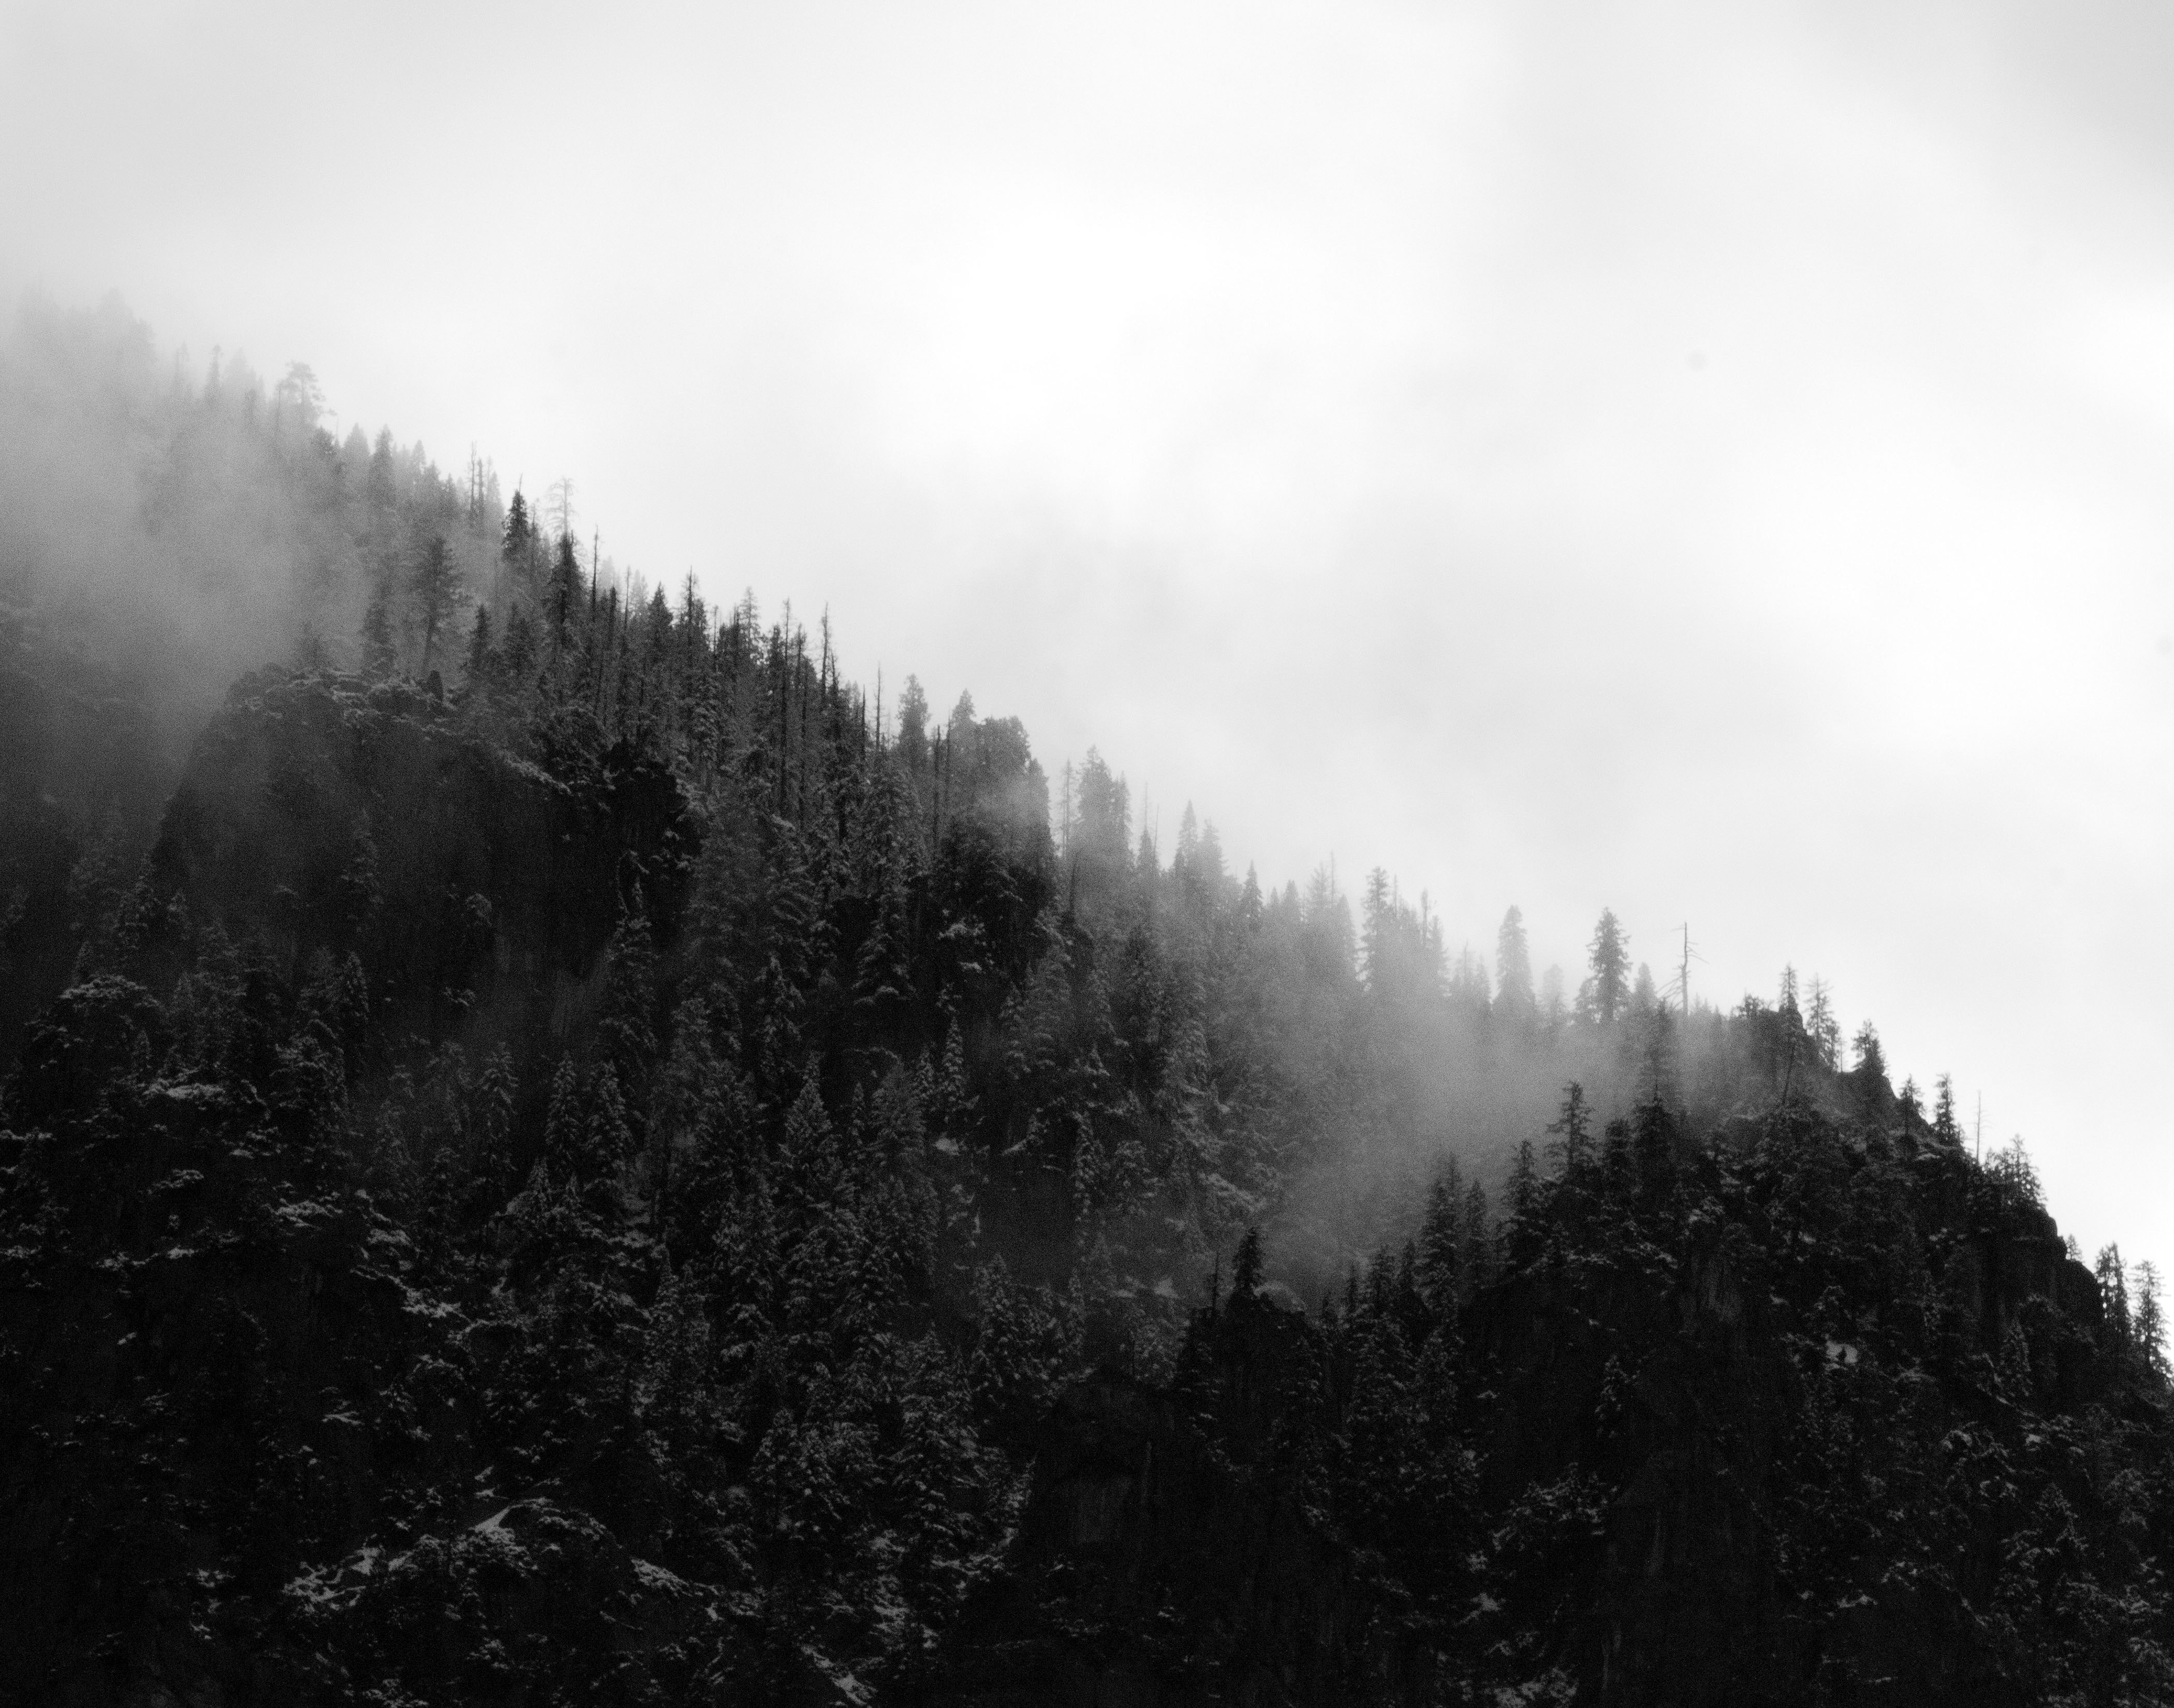 Grayscale photo of trees on mountain